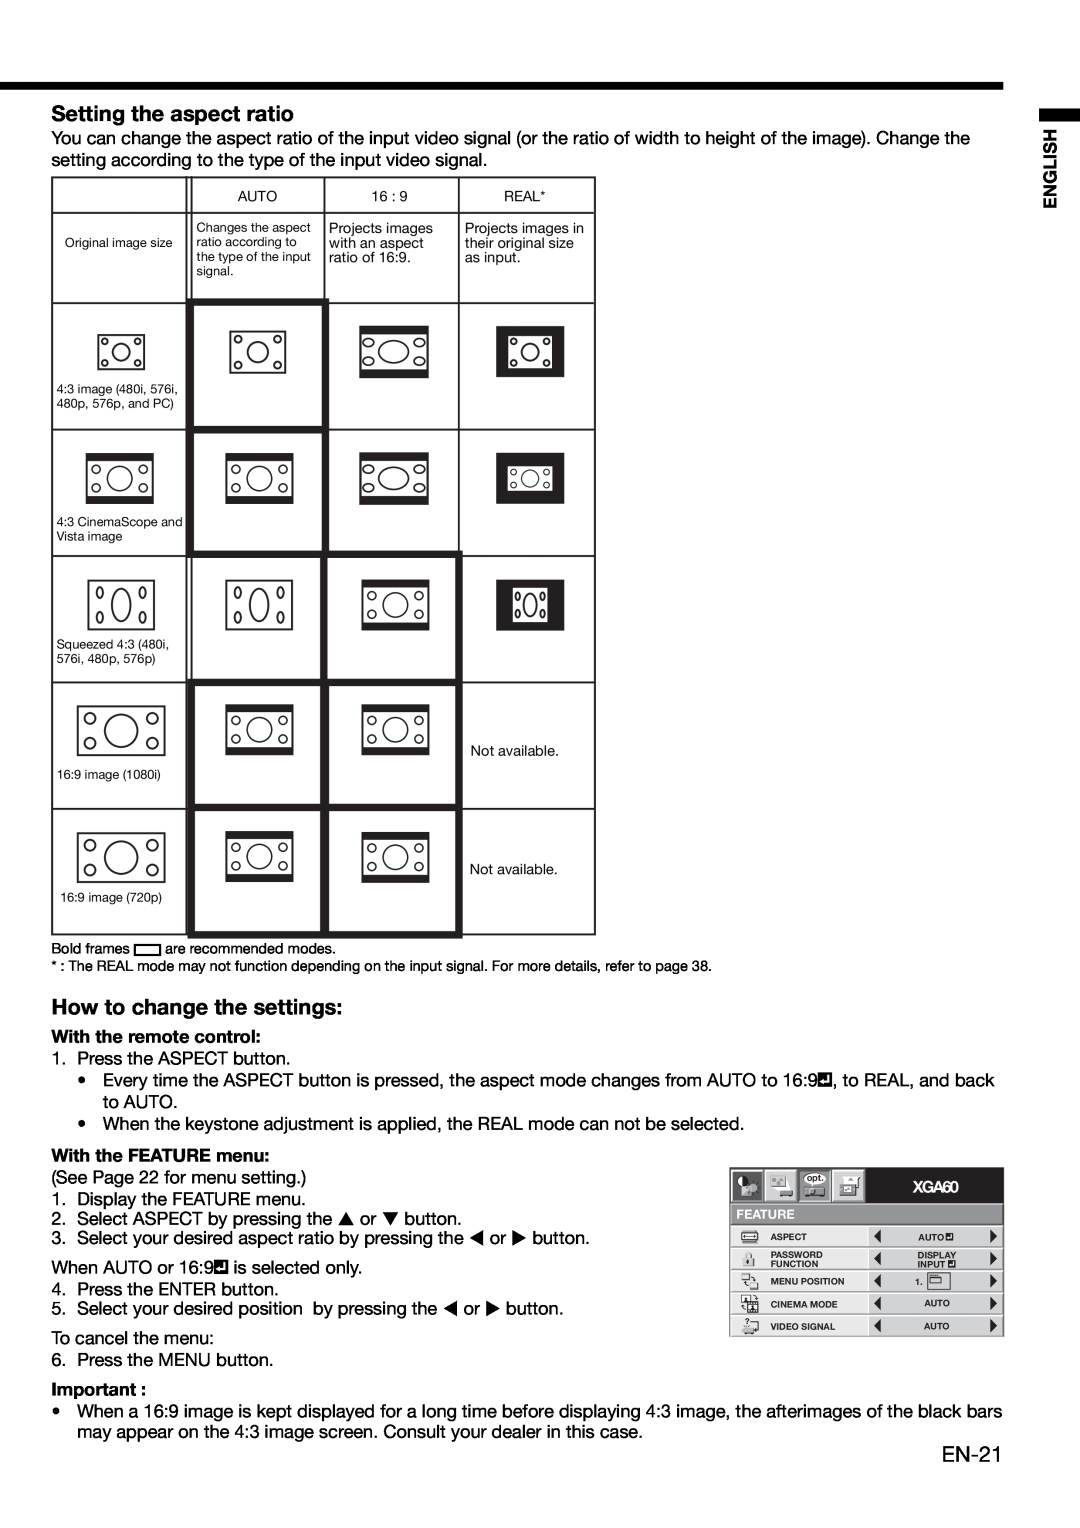 Mitsubishi Electronics XD460U Setting the aspect ratio, How to change the settings, EN-21, With the remote control 